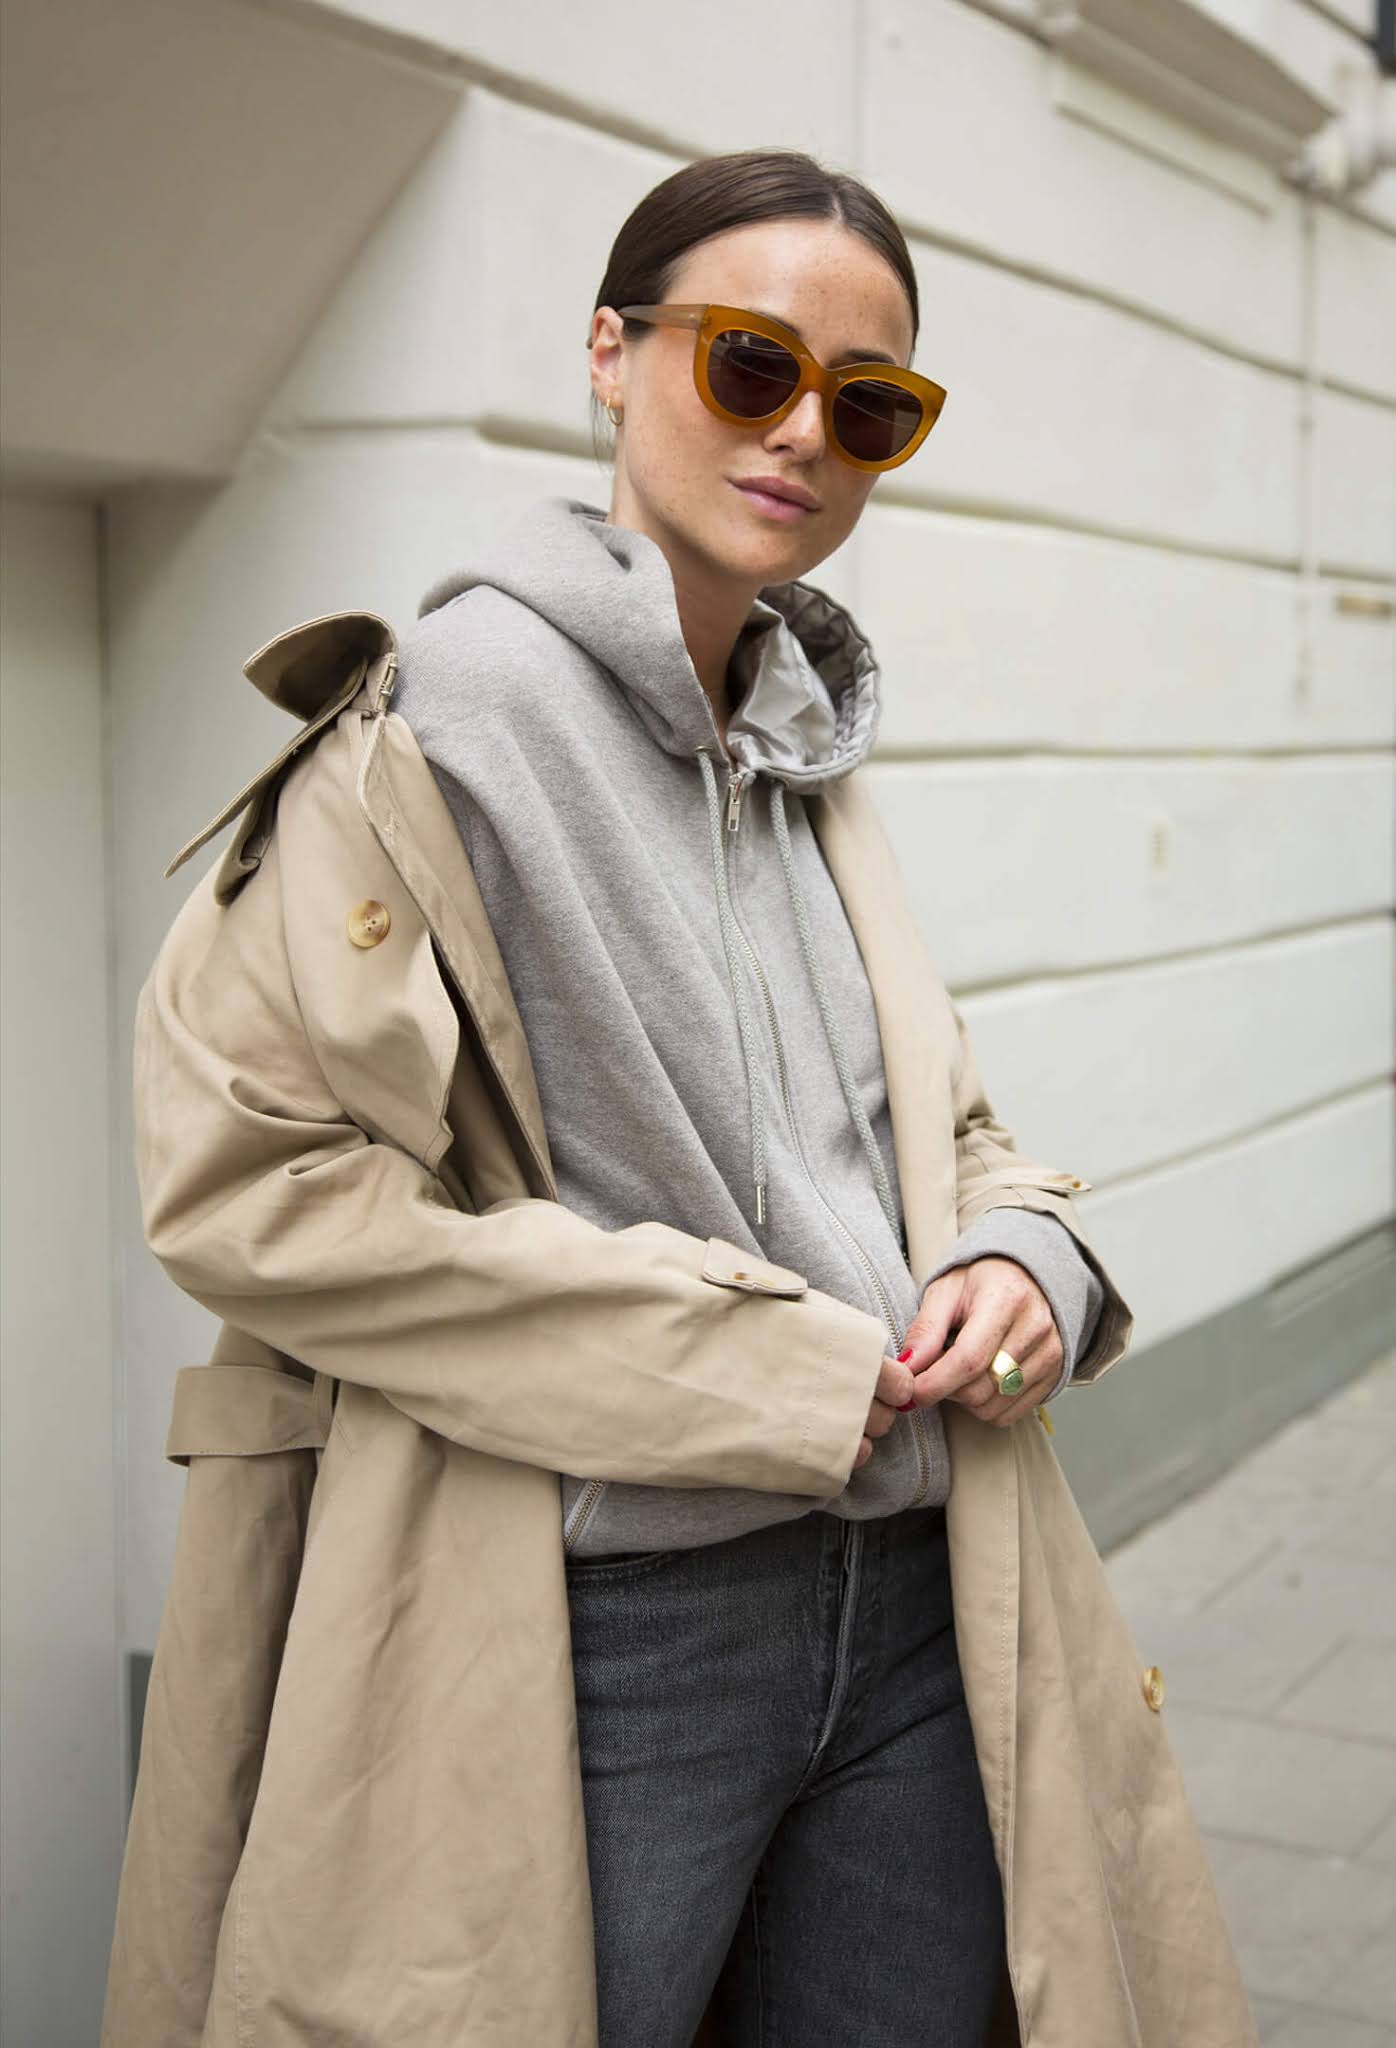 A Hoodie and Trench Coat Make for the Perfect Spring Outfit Combo — Lena Lademann in a classic trench coat, gray hooded sweatershirt, and faded black jeans